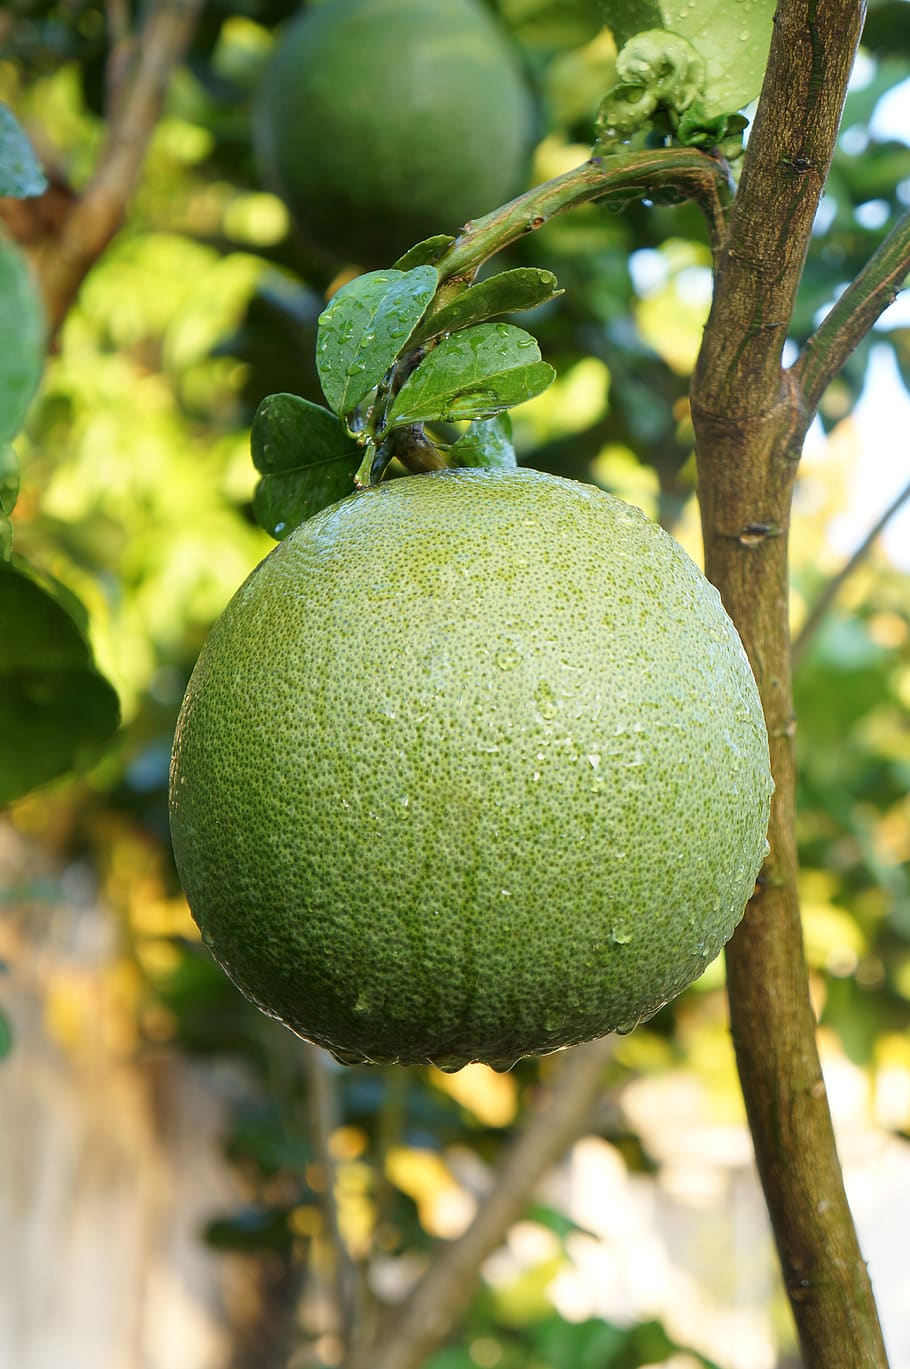 grapefruit, green skin pomelo grapefruit, fruits, plant, fruit, tree, food, food and drink, growth, healthy eating